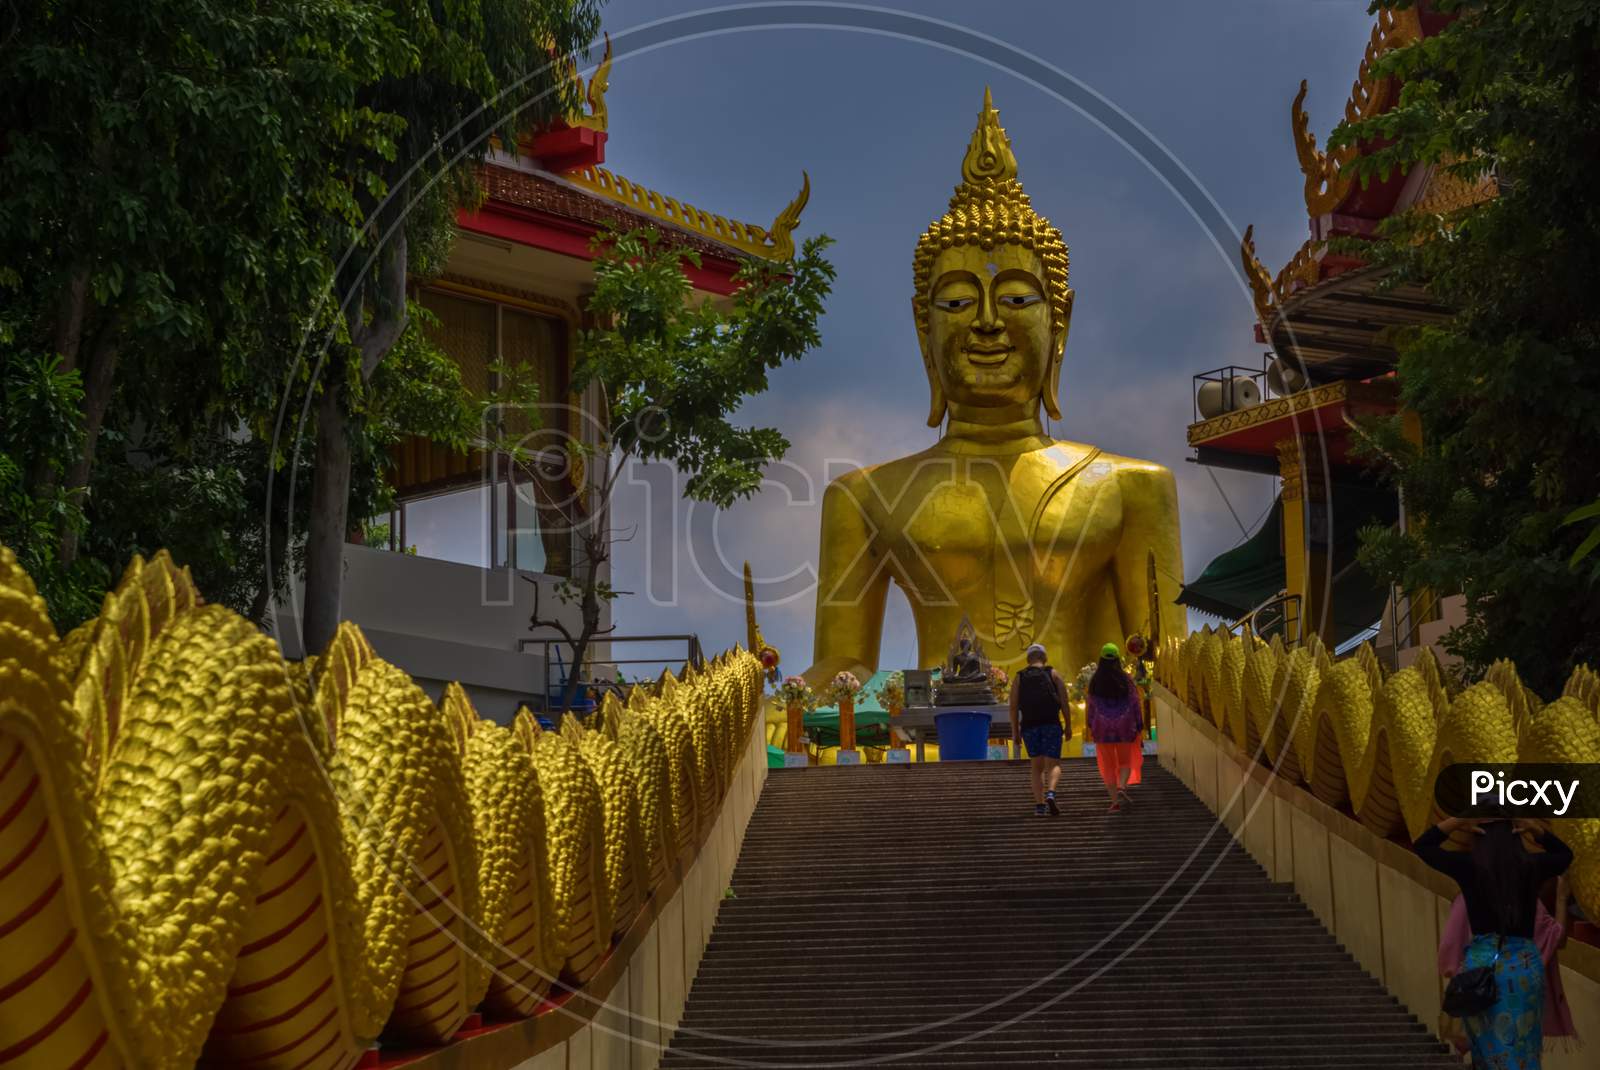 Pattaya,Thailand - October 15,2019:Buddha Hill This Is The Big Buddha Statue On The Hill Between Pattaya And Jomtien.It Is A Popular Tourist Attraction.